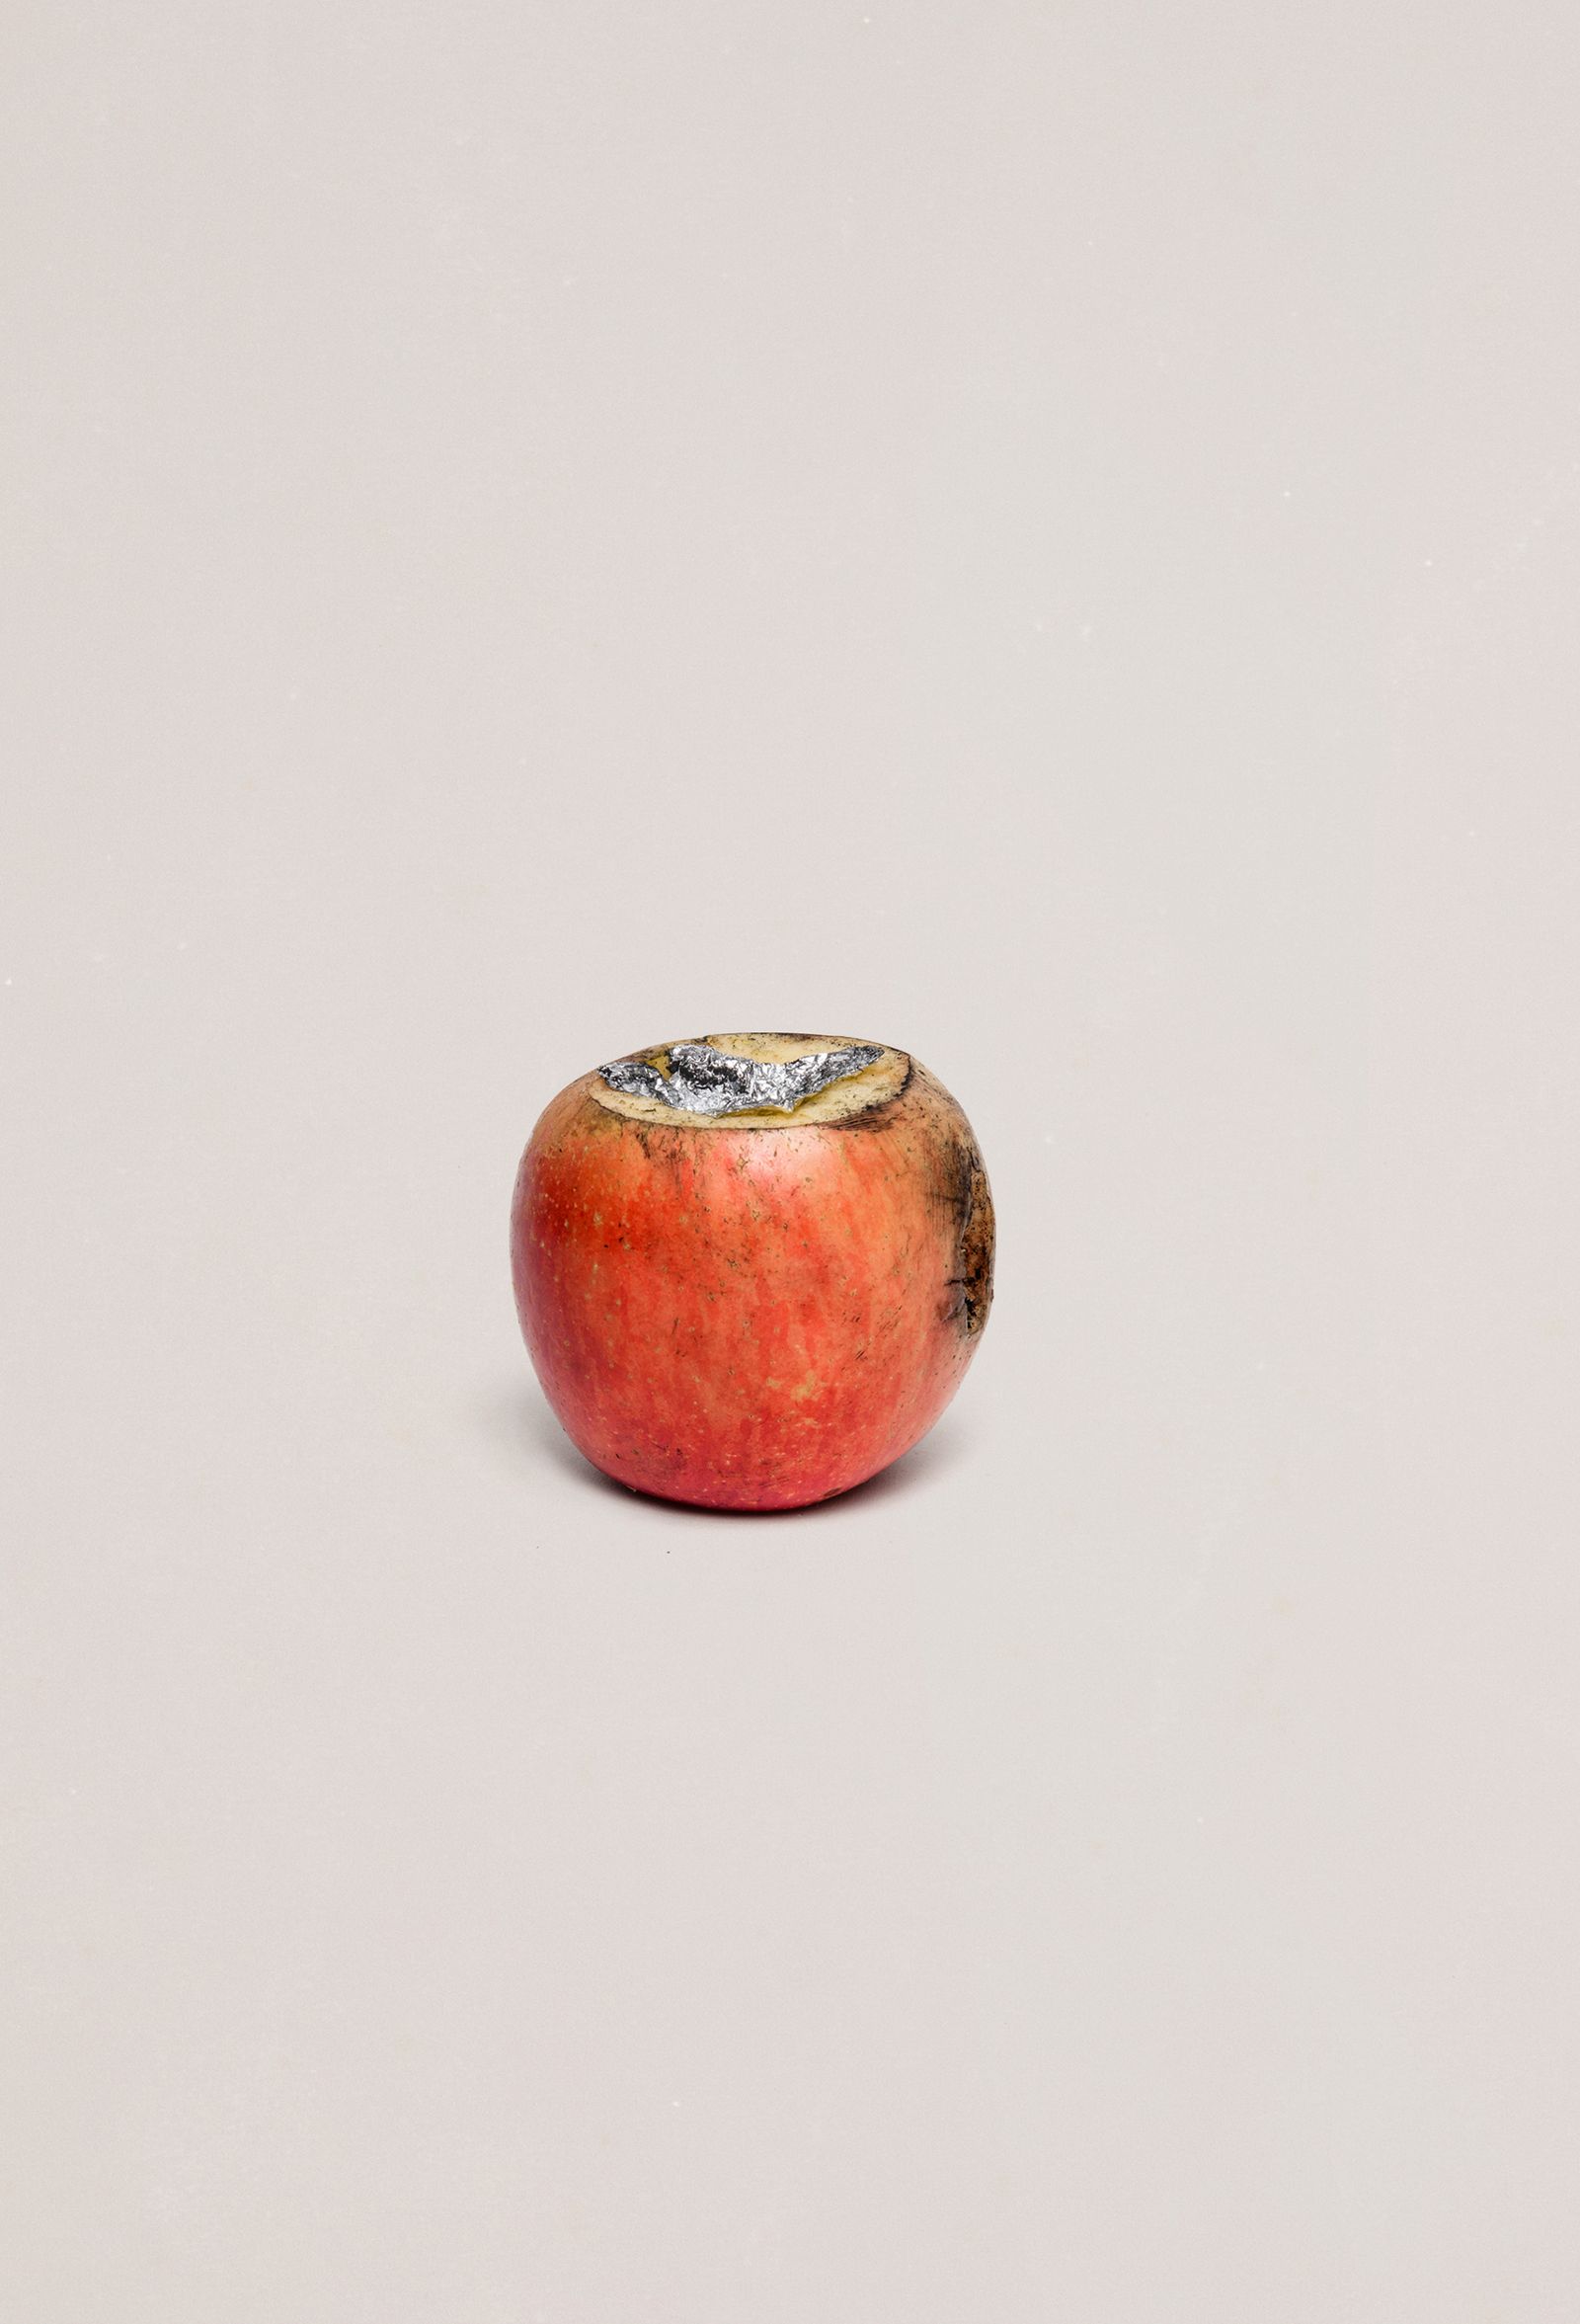 © Gui Christ - A pipe made from an apple